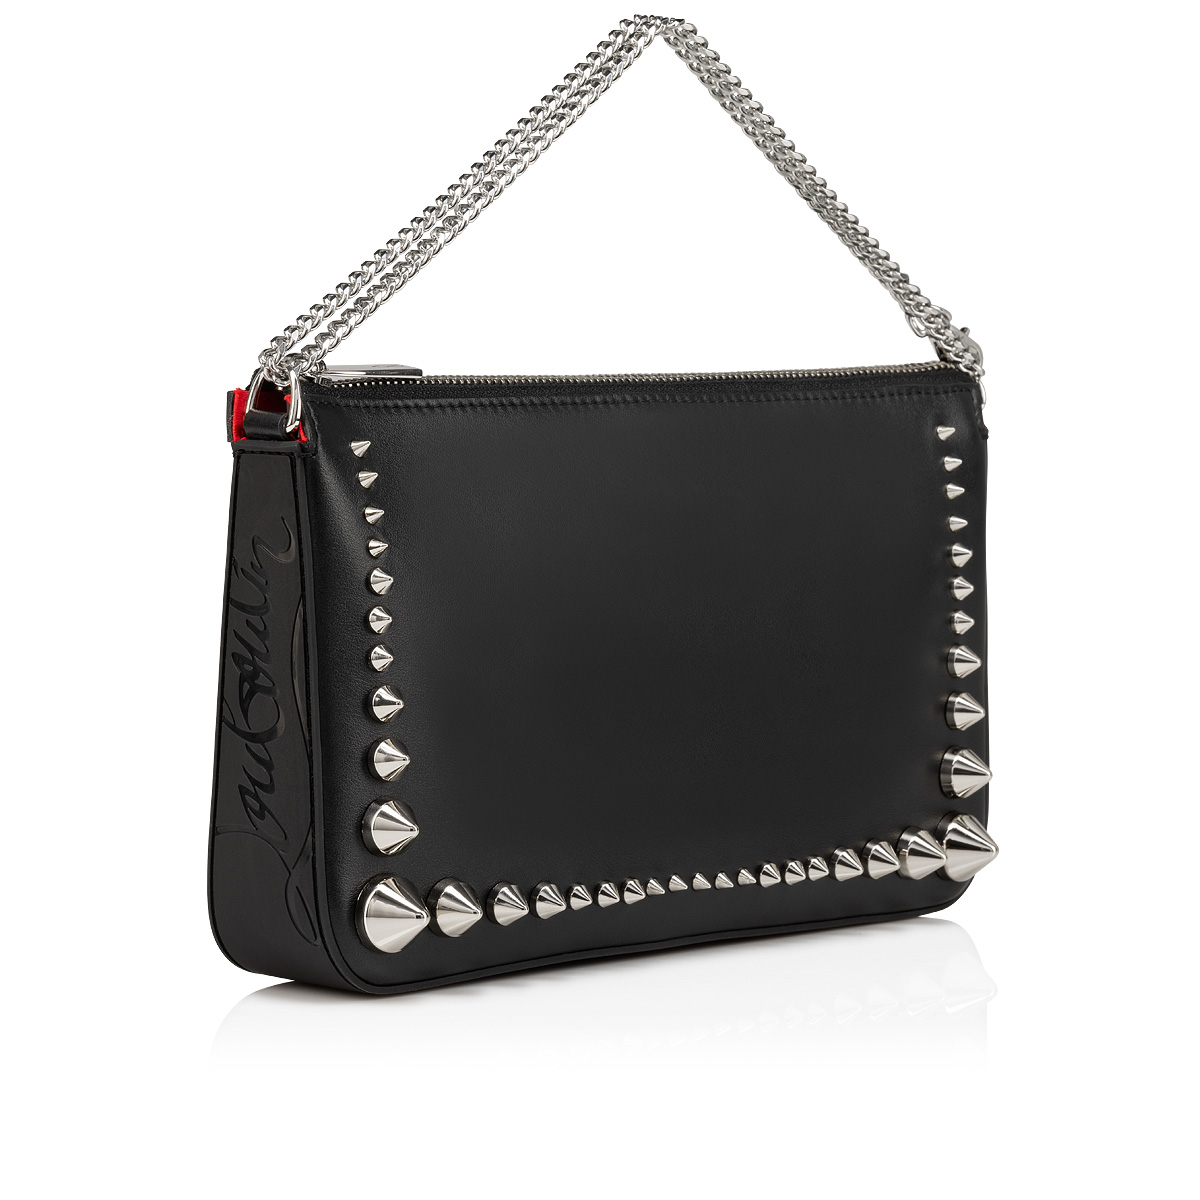 Christian Louboutin bag men's clutch second leather CITY POUCH black  1225143 spike studs